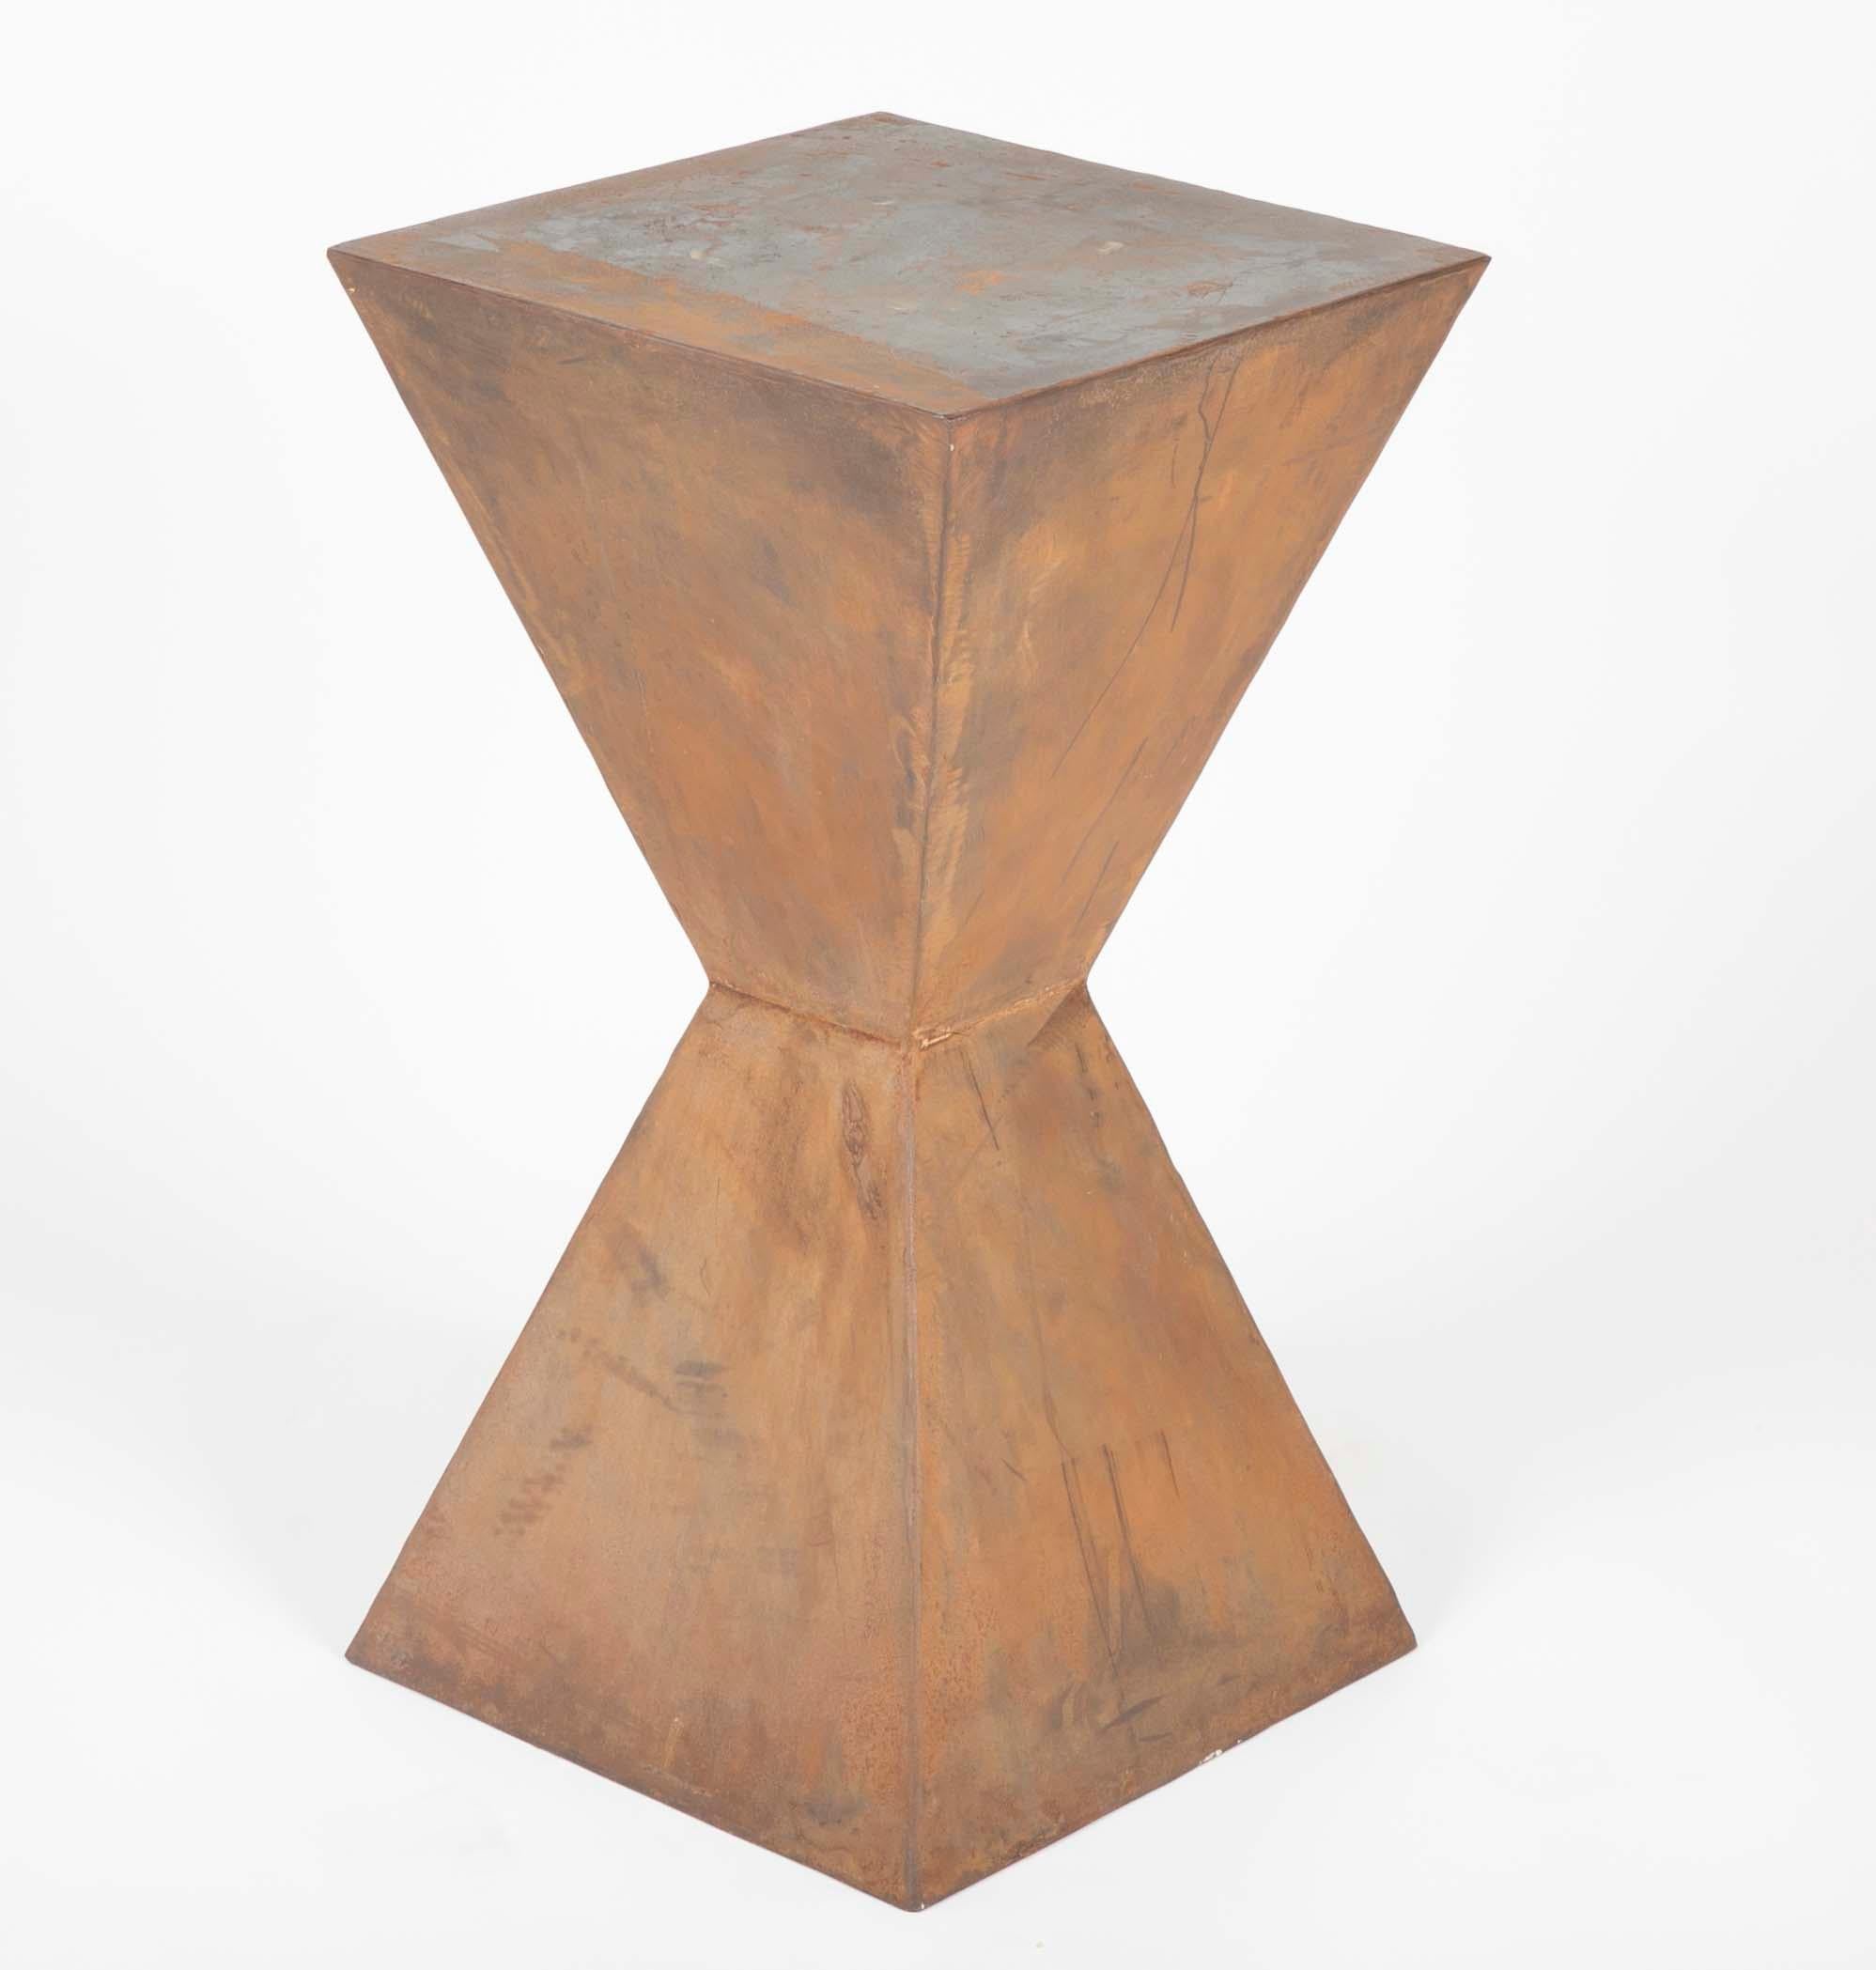 Compelling pair of geometric steel side tables or pedestals very much in the style of Constantin Brancusi. With a soft rust colored patina, these will make great lamp stands or wonderful pedestals for sculpture or other objects. 
Measures: 28.4